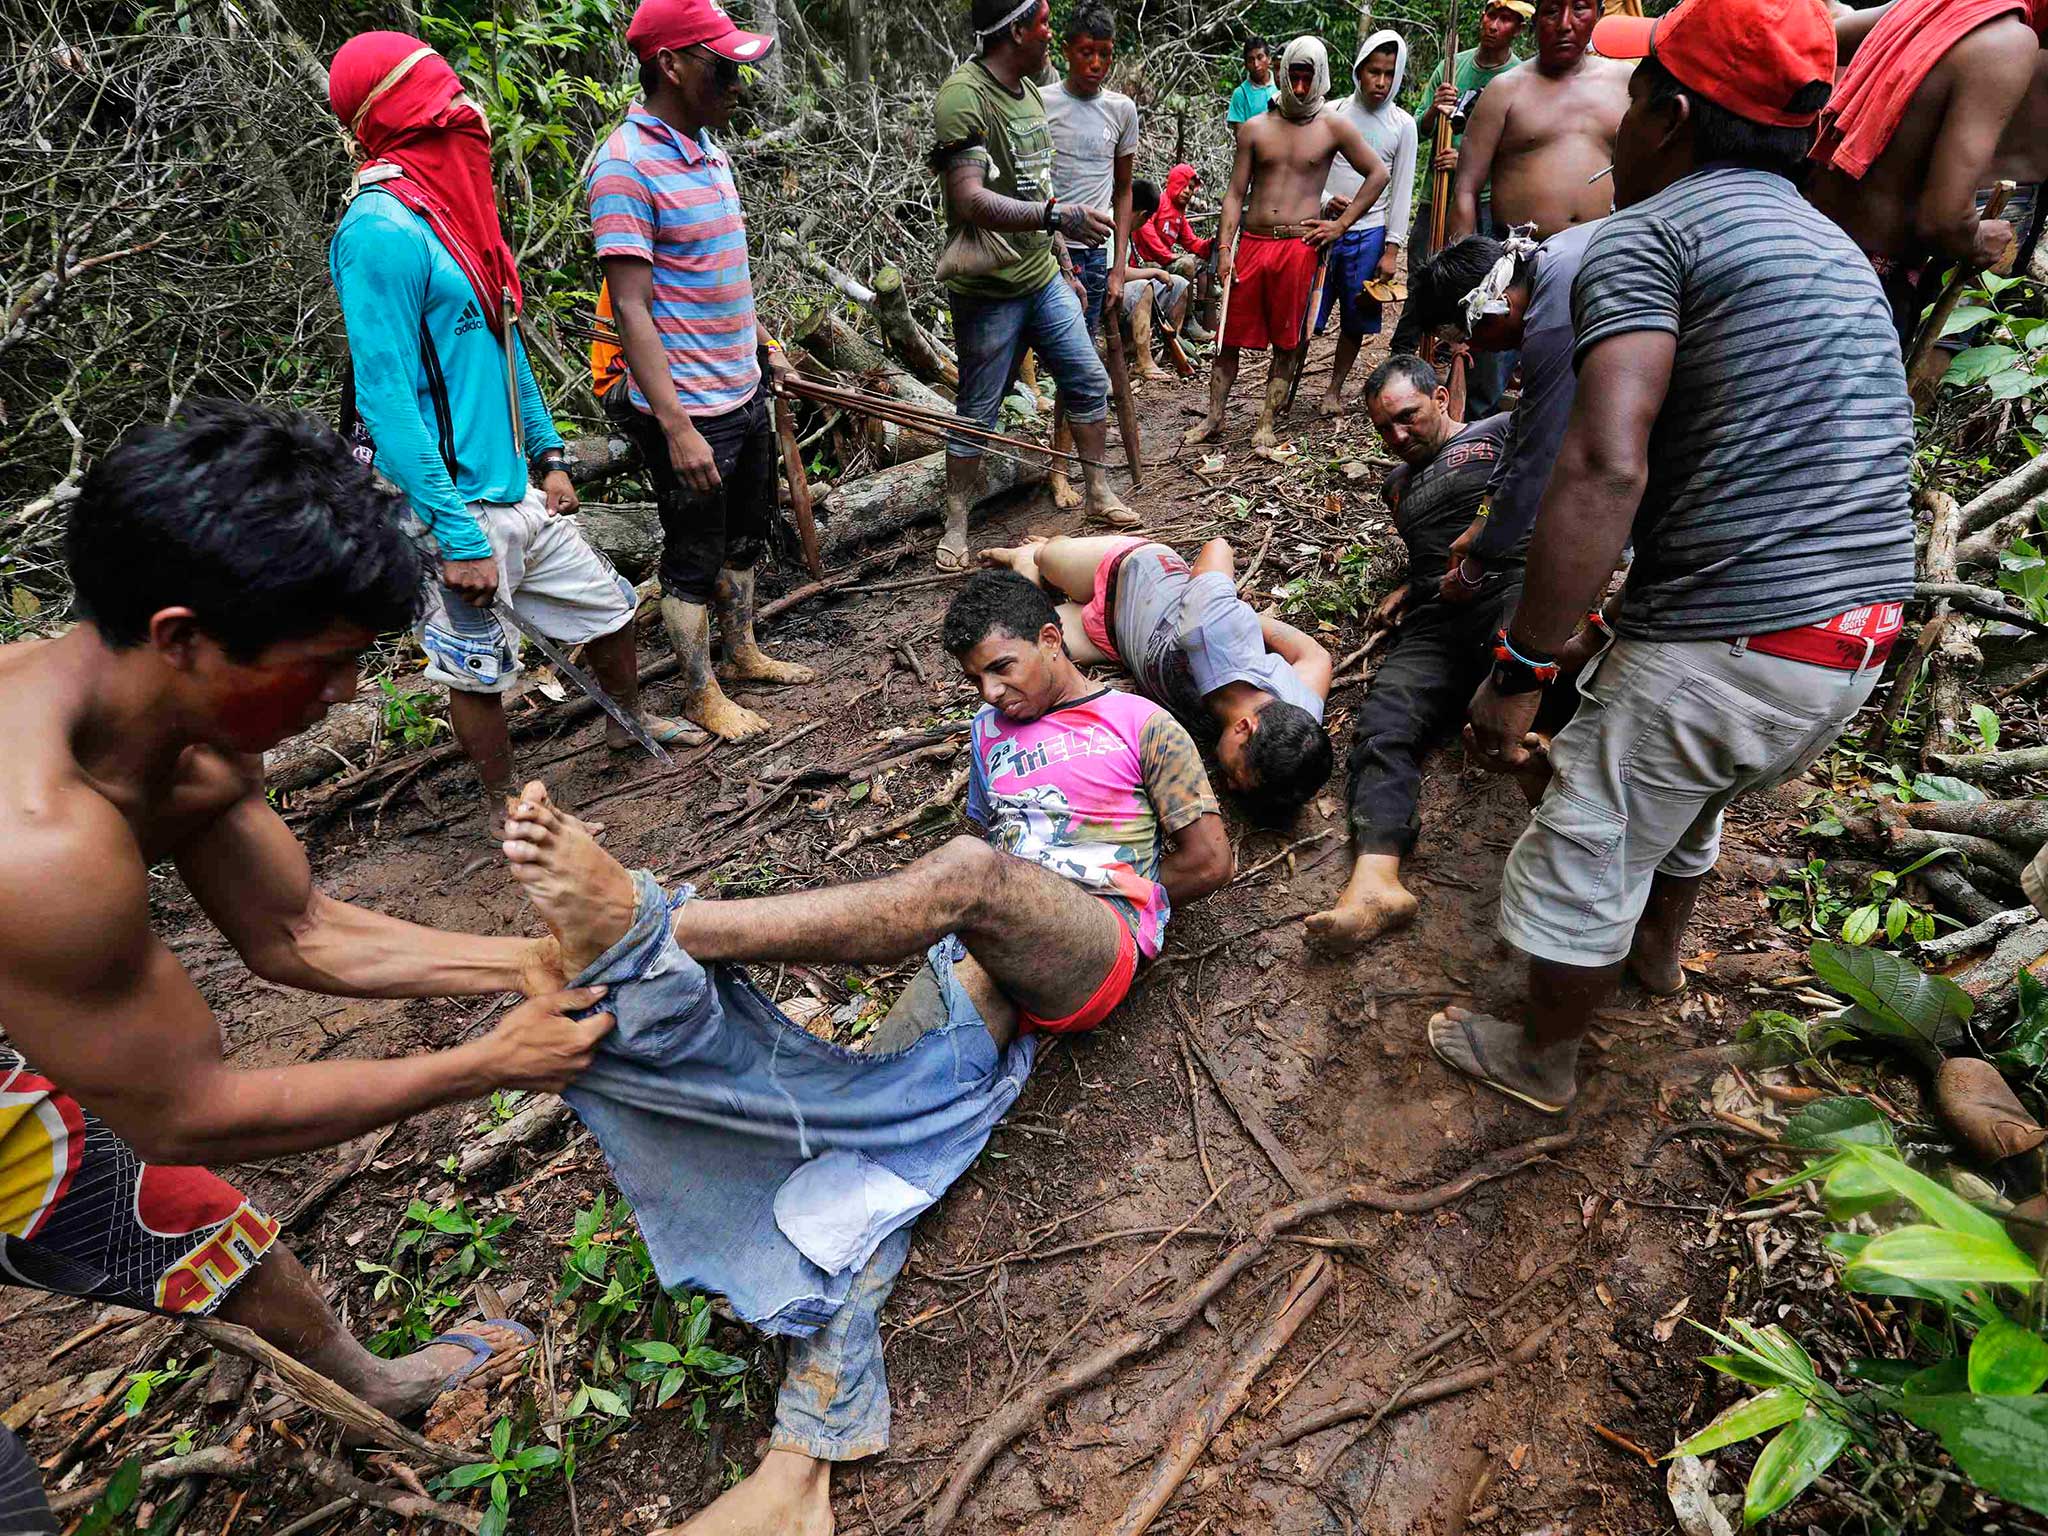 Photographs Show Amazonian Tribe Capturing And Stripping Illegal